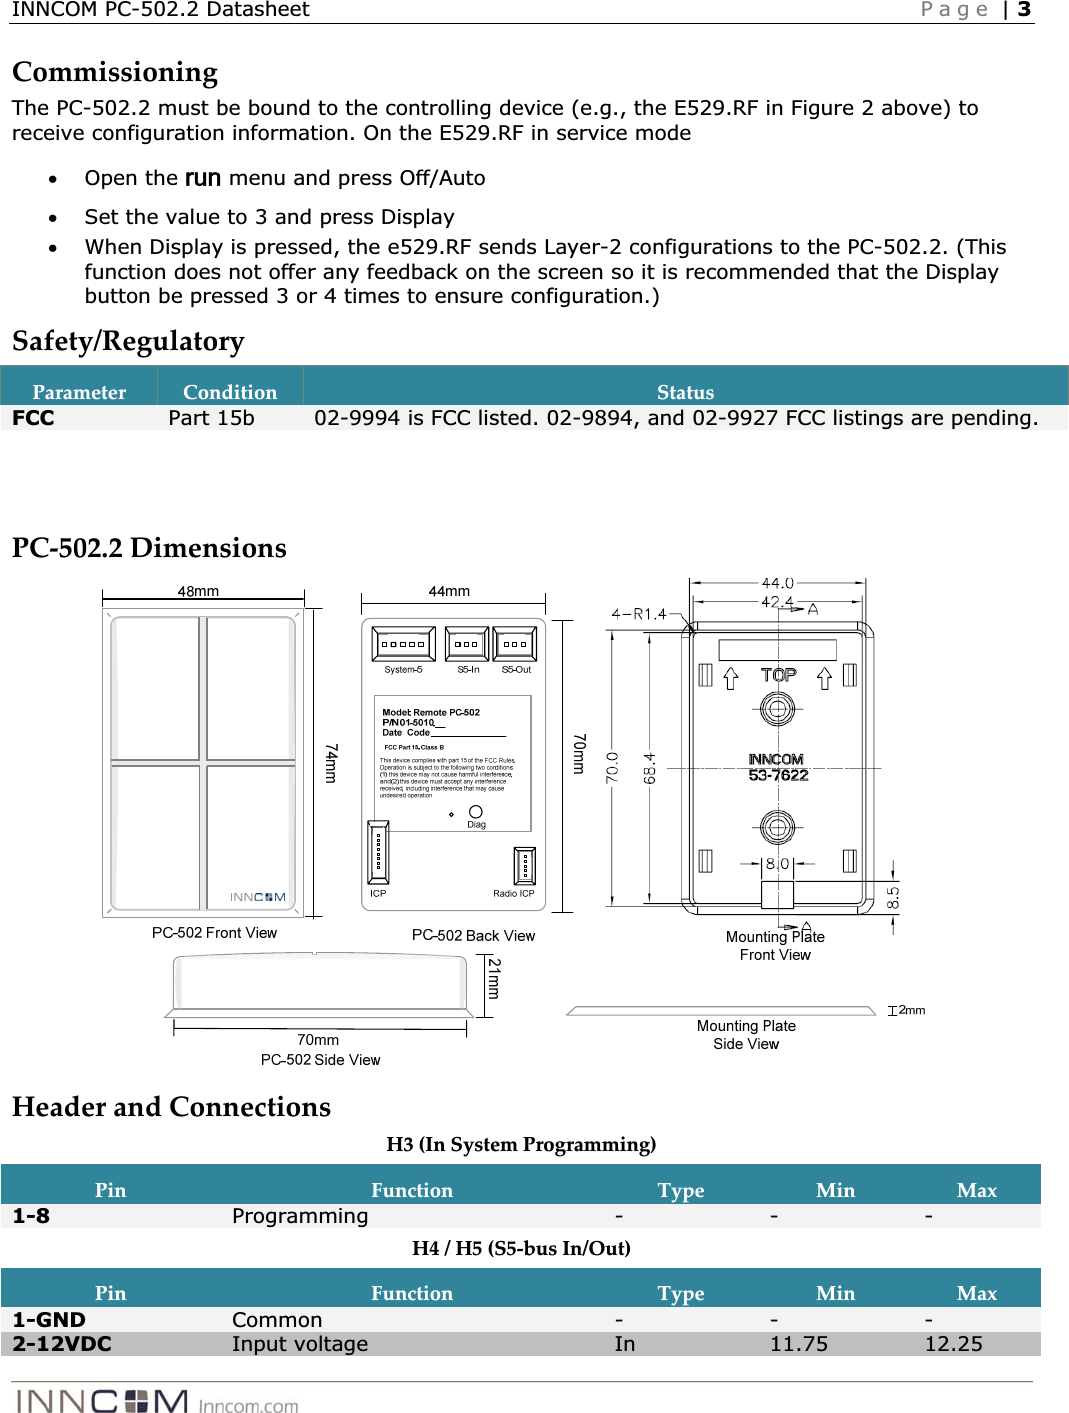 INNCOM PC-502.2 Datasheet   Page | 3CommissioningȱThe PC-502.2 must be bound to the controlling device (e.g., the E529.RF in Figure 2 above) to receive configuration information. On the E529.RF in service mode xOpen the run menu and press Off/Auto xSet the value to 3 and press Display xWhen Display is pressed, the e529.RF sends Layer-2 configurations to the PC-502.2. (This function does not offer any feedback on the screen so it is recommended that the Display button be pressed 3 or 4 times to ensure configuration.) Safety/RegulatoryȱParameterȱConditionȱStatusȱFCC  Part 15b  02-9994 is FCC listed. 02-9894, and 02-9927 FCC listings are pending.   PCȬ502.2ȱDimensionsȱȱHeaderȱandȱConnectionsȱH3ȱ(InȱSystemȱProgramming)ȱPinȱFunctionȱTypeȱMinȱMaxȱ1-8  Programming ---H4ȱ/ȱH5ȱ(S5ȬbusȱIn/Out)ȱPinȱFunctionȱTypeȱMinȱMaxȱ1-GND  Common ---2-12VDC  Input voltage  In 11.75  12.25 